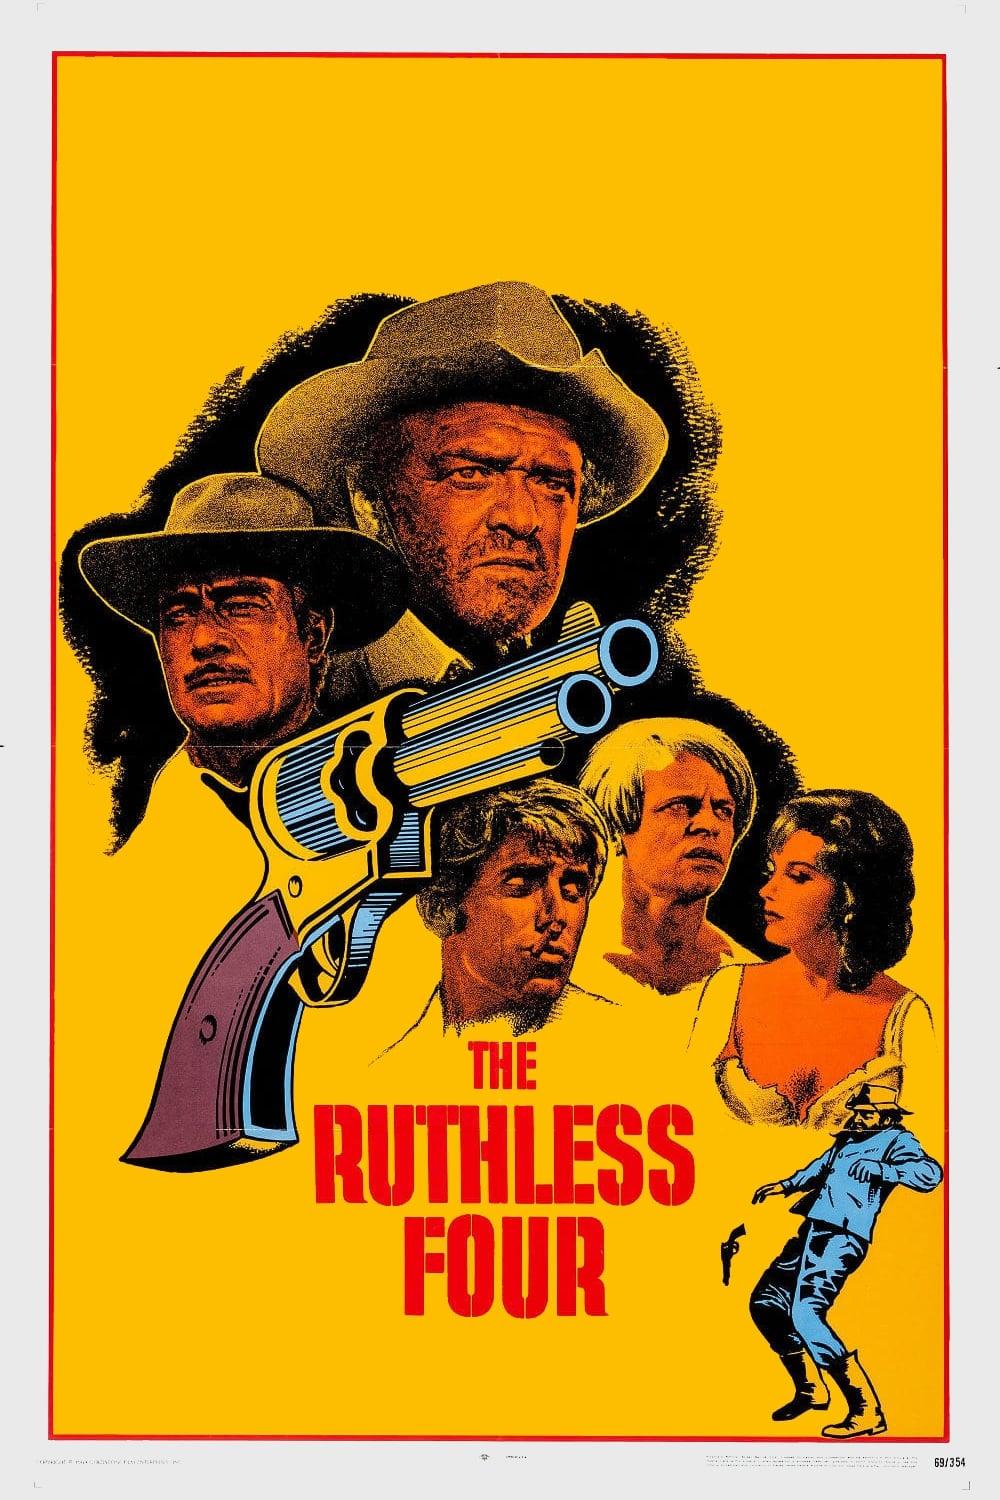 The Ruthless Four poster